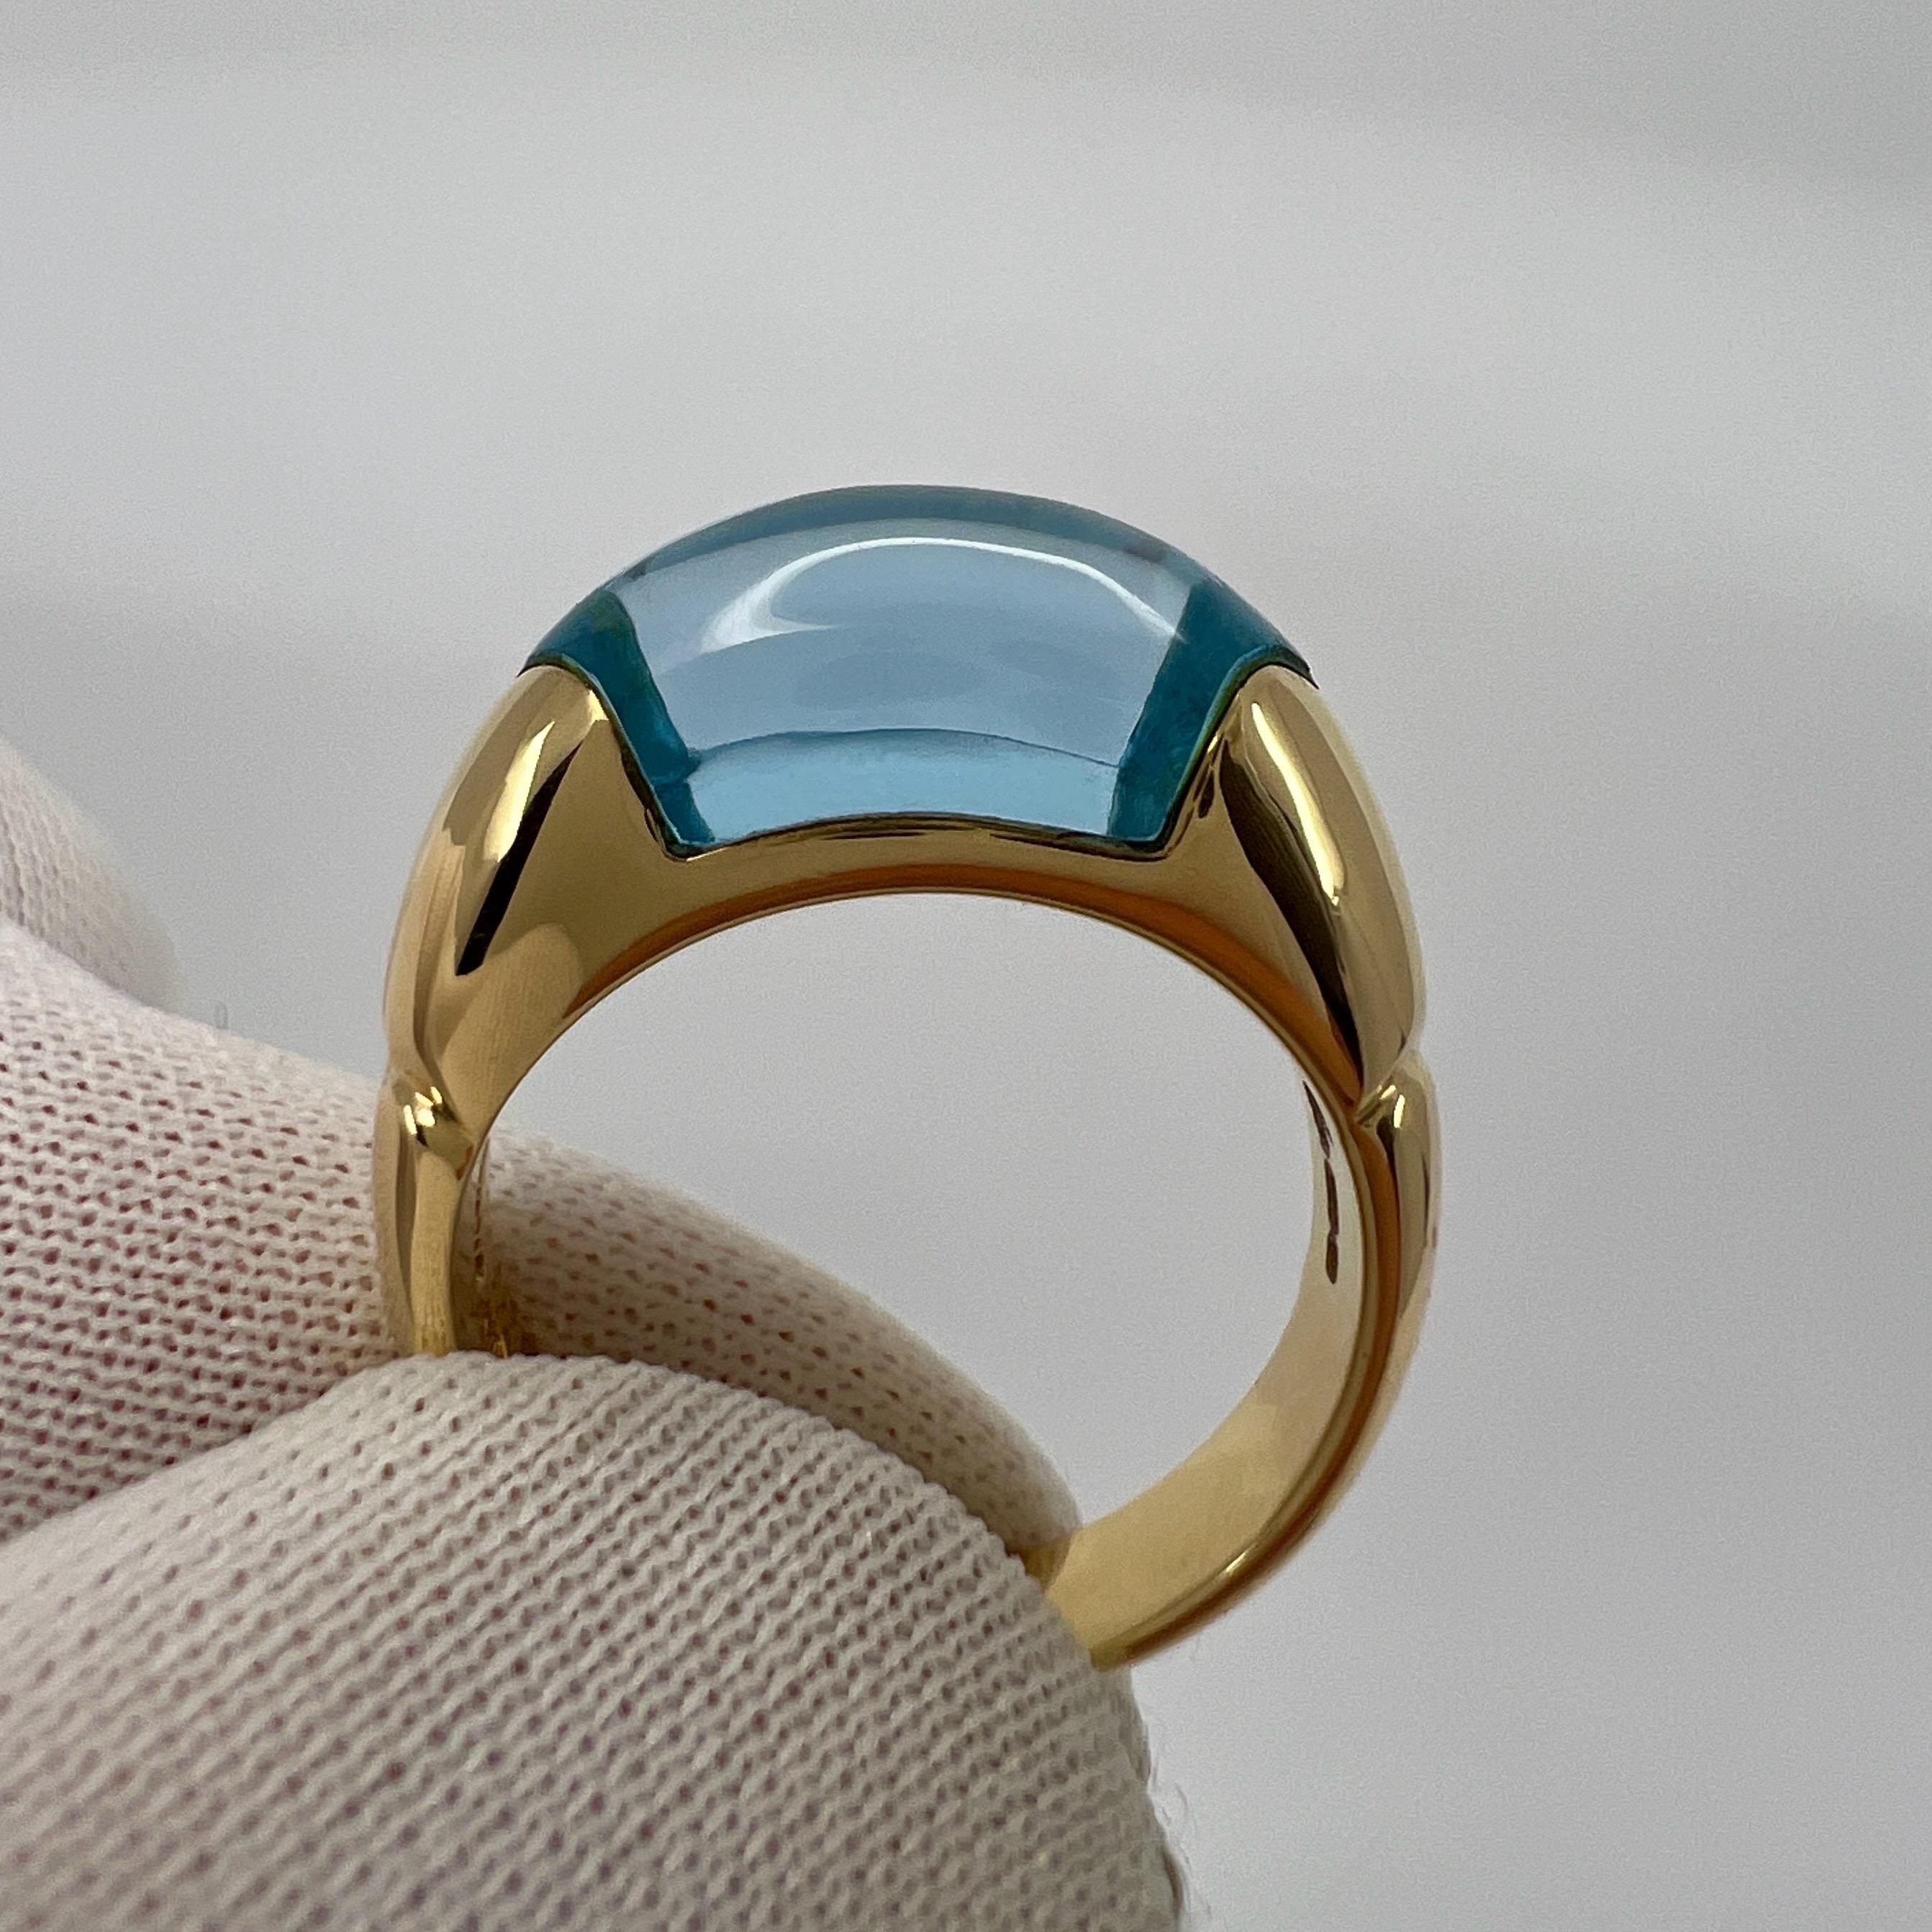 Rare Vintage Bvlgari Certica 18k Yellow Gold Blue Topaz Dome Ring with Box 5